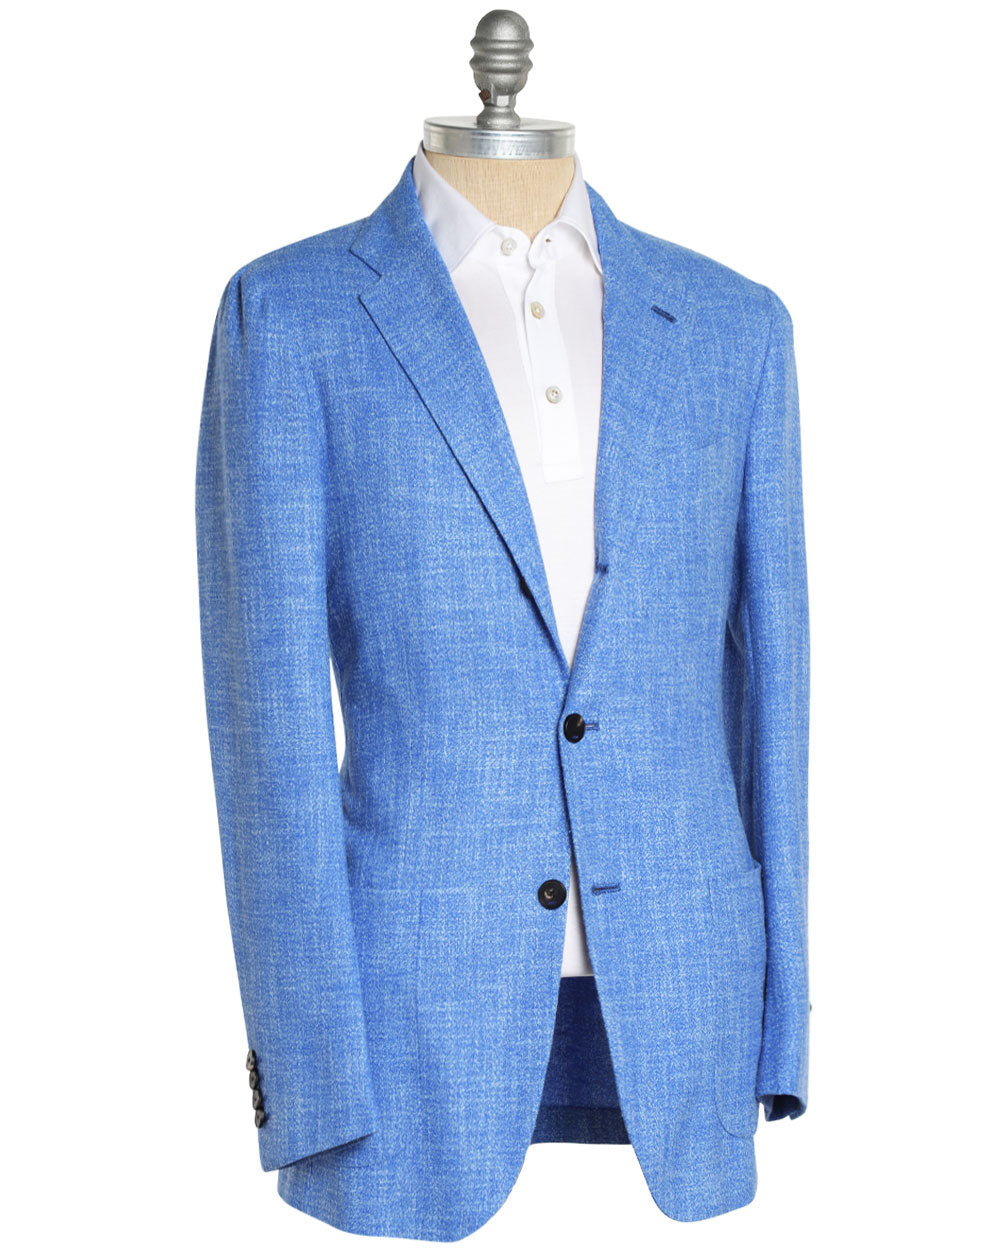 Electric Blue Donegal Sportcoat